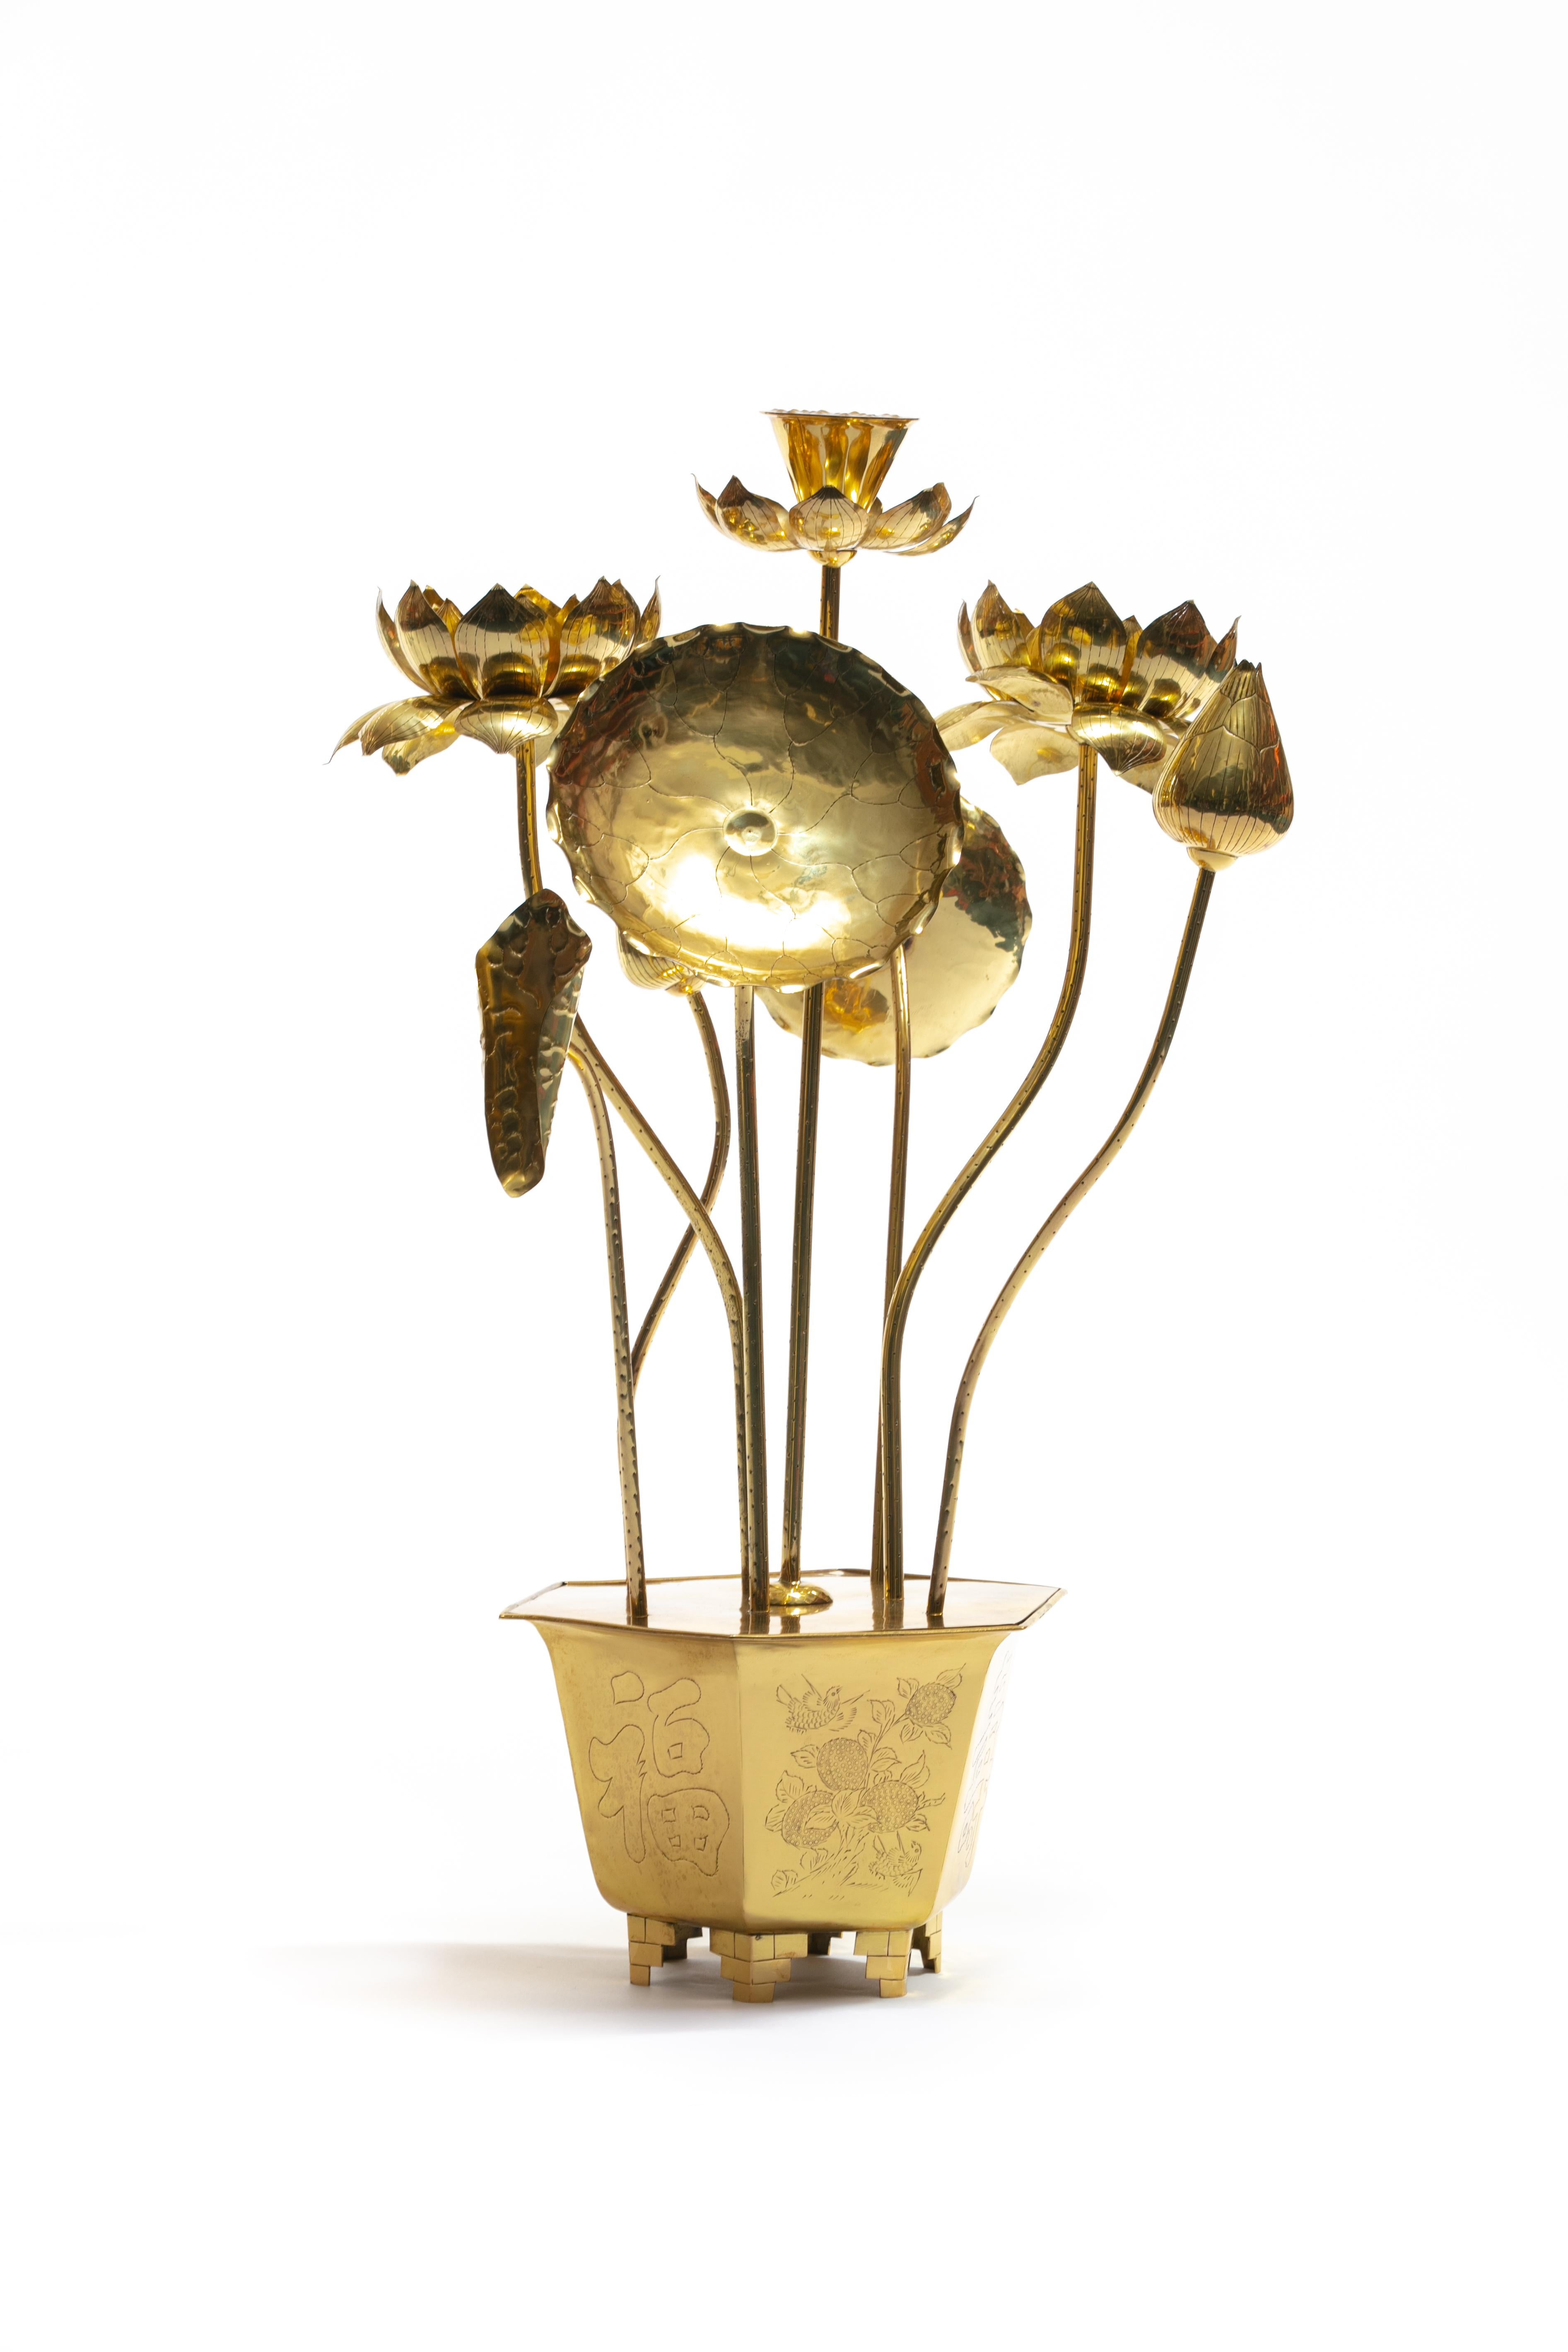 Feldman Chinoiserie Adjustable Brass Lotus Bouquet Sculpture, circa 1970 In Good Condition For Sale In Saint Louis, MO